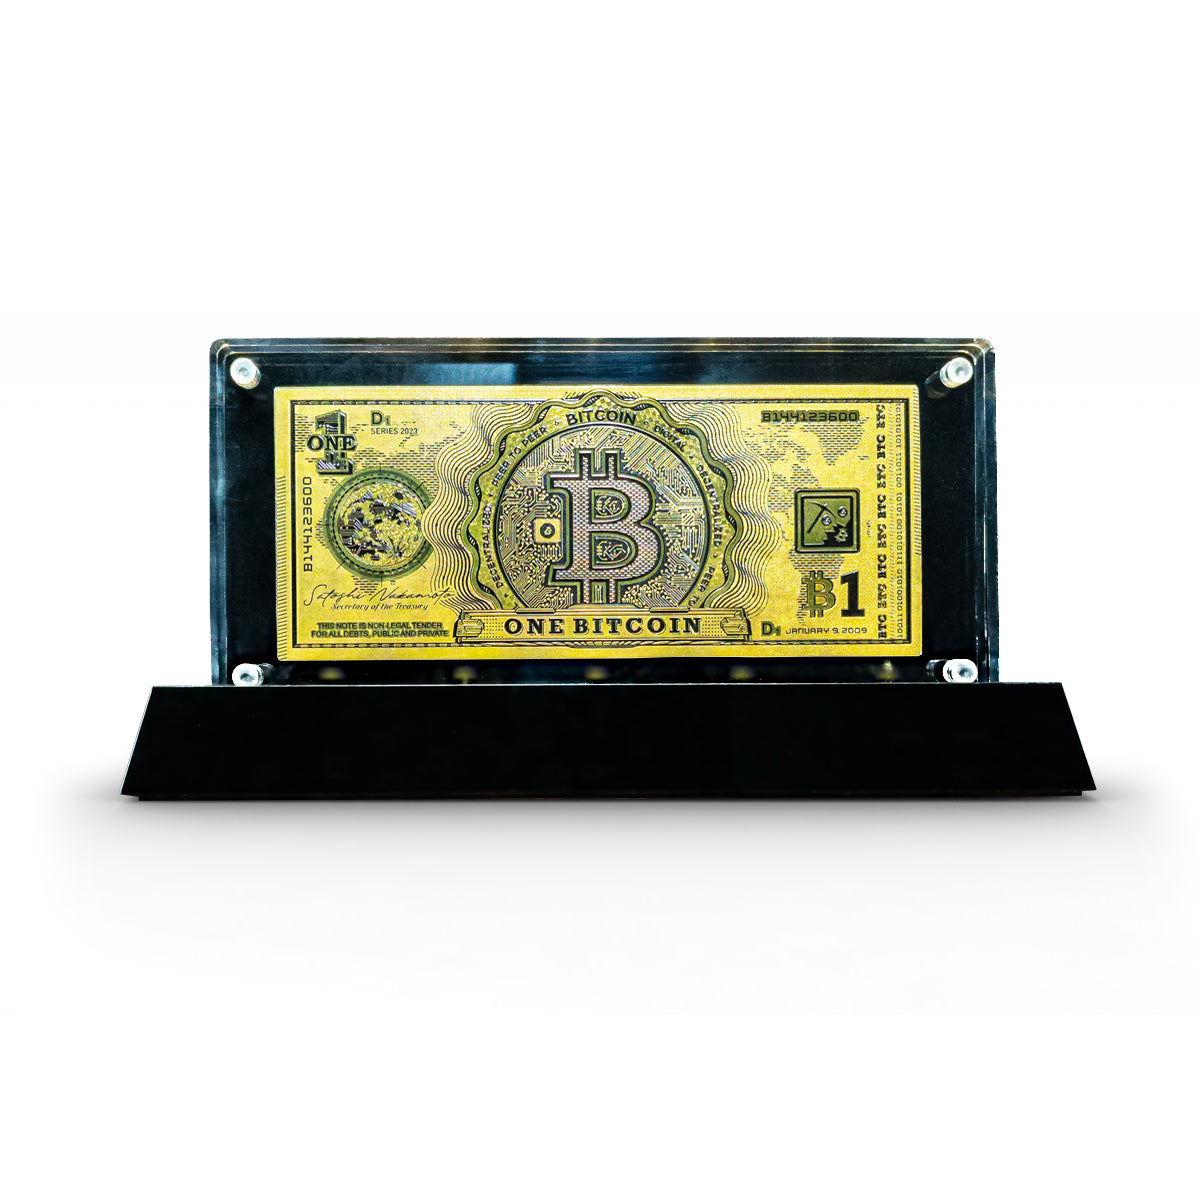 Cryptochips | LED Acrylic Moon Money Display Physical Crypto Coin. Collectable cryptocurrency merch you can hodl